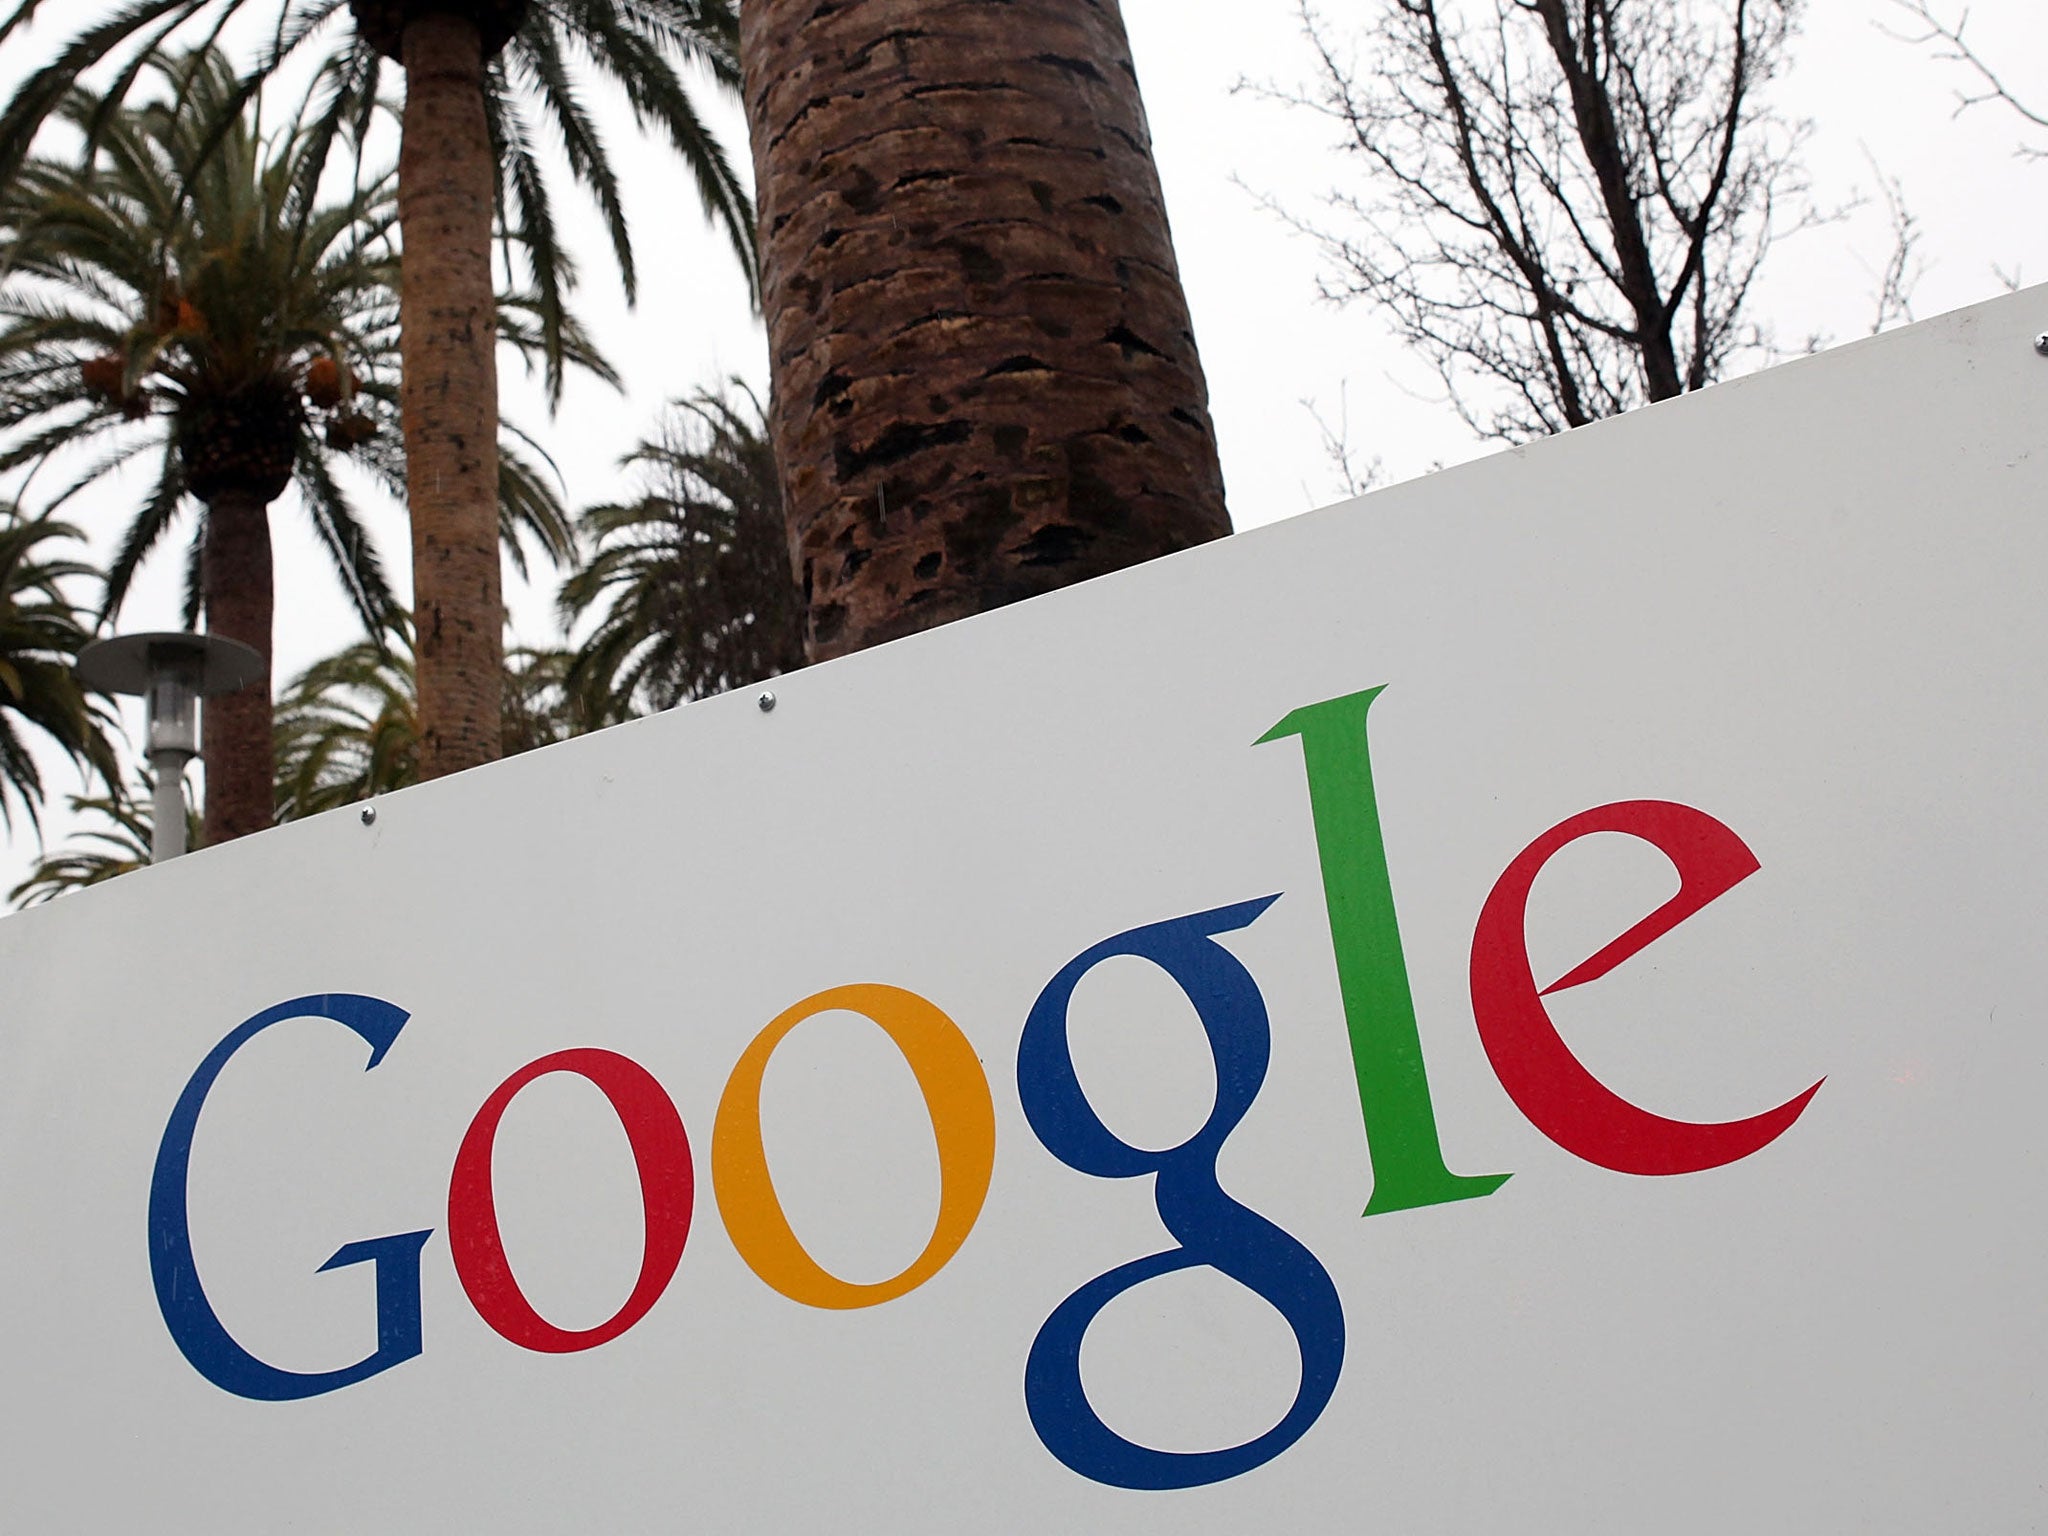 Google will no longer show adverts that "promote graphic depictions of sexual acts"